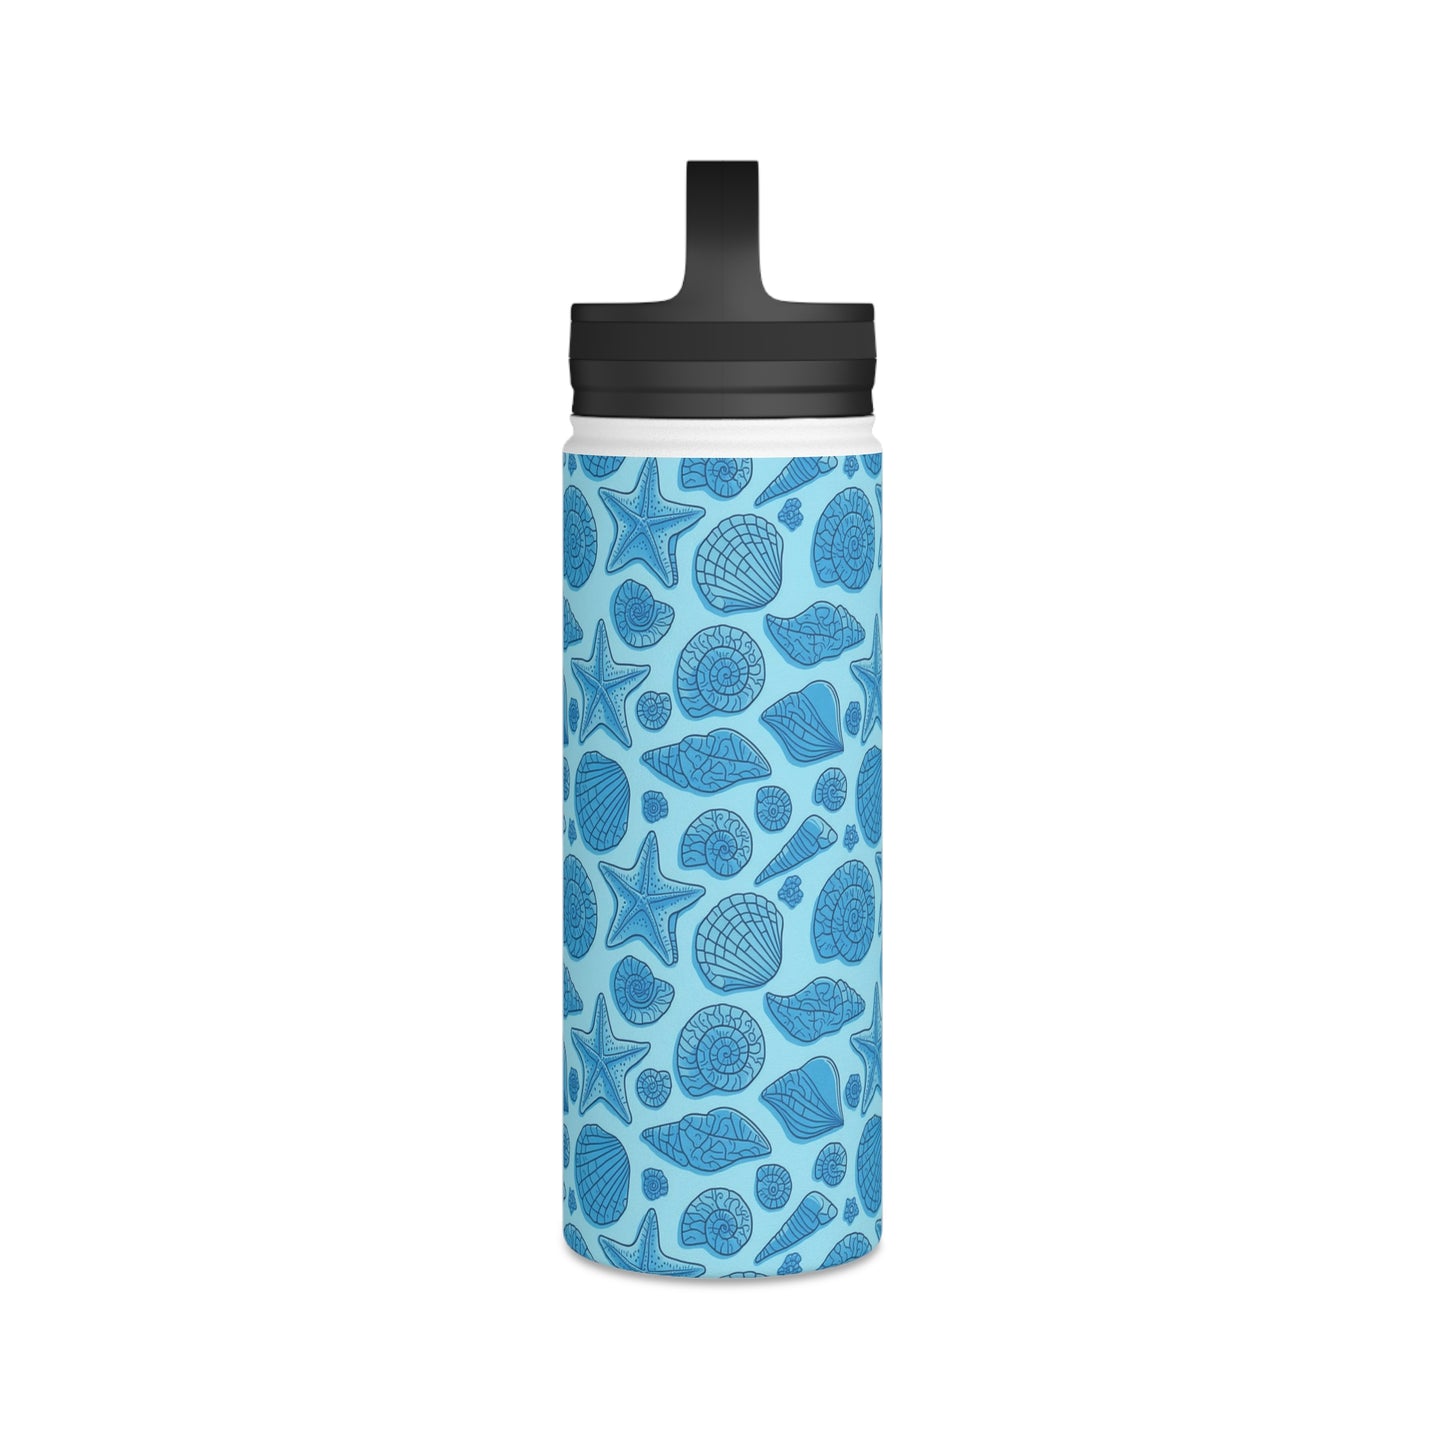 Dive into Enchantment with Blue Mermaid Starfish Seashell Stainless Steel Reusable Water Bottle, Handle Lid, Insulated, Sustainable Living